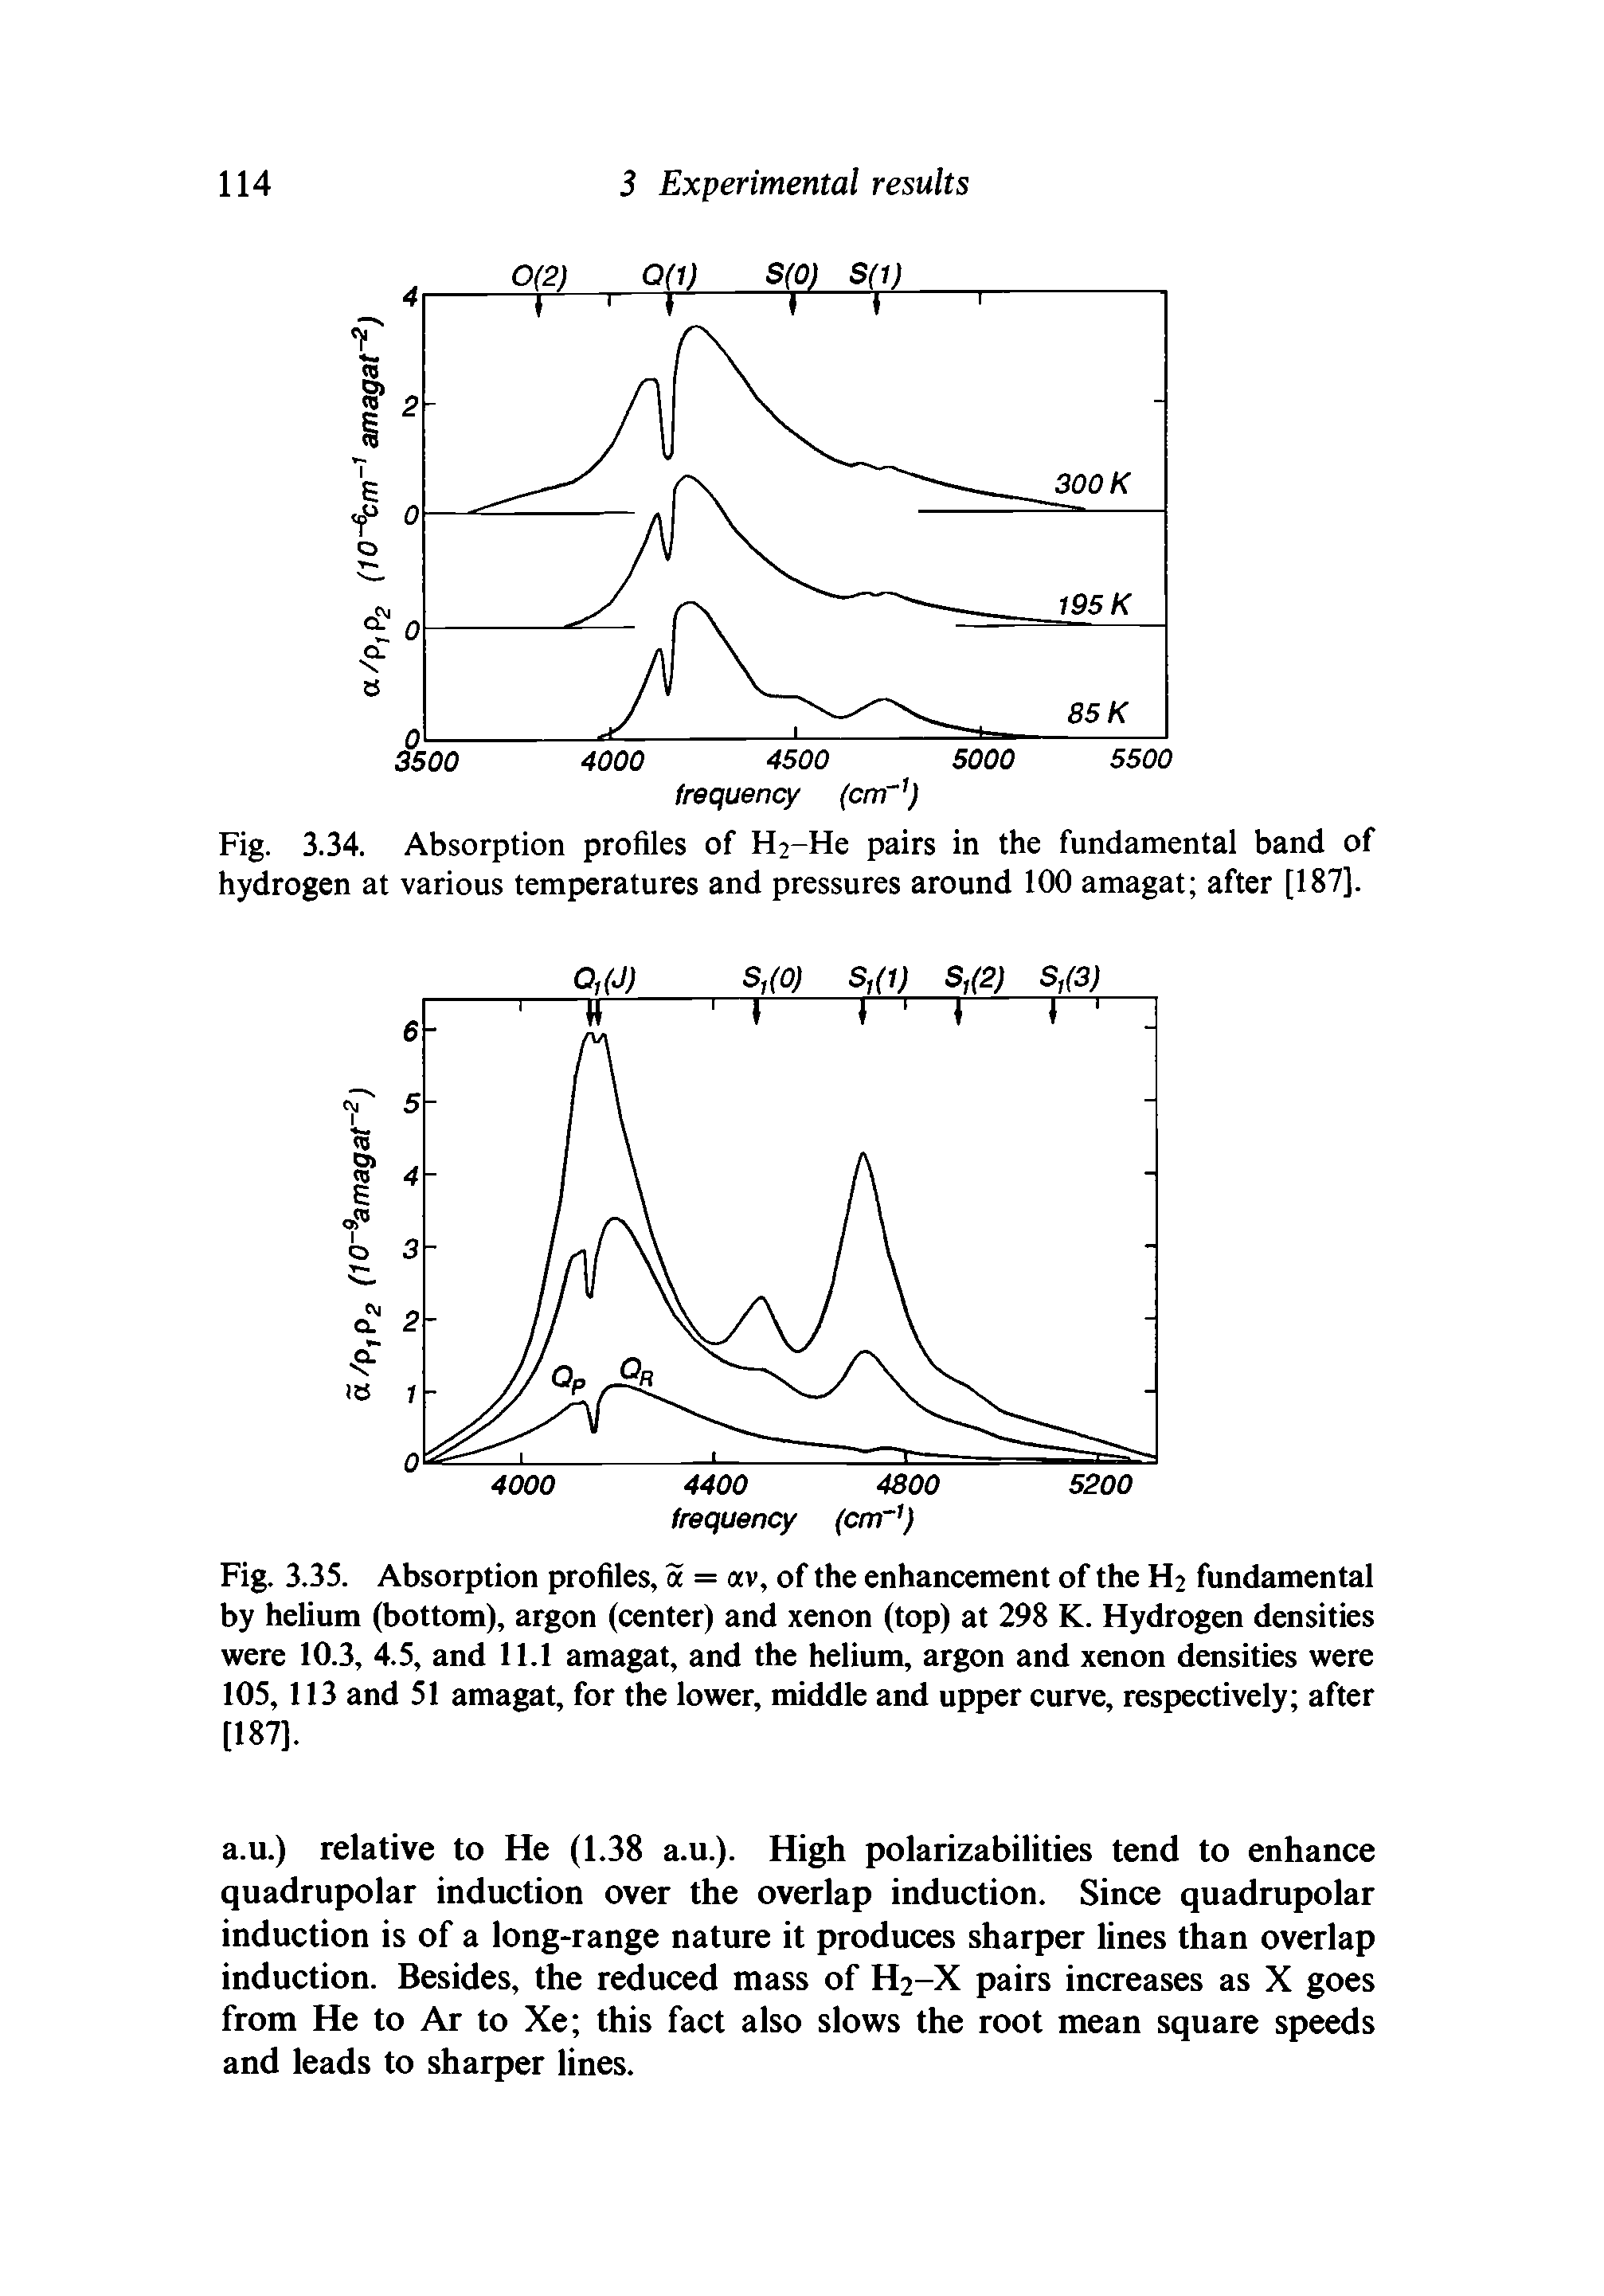 Fig. 3.35. Absorption profiles, a = av, of the enhancement of the H2 fundamental by helium (bottom), argon (center) and xenon (top) at 298 K. Hydrogen densities were 10.3, 4.5, and 11.1 amagat, and the helium, argon and xenon densities were 105, 113 and 51 amagat, for the lower, middle and upper curve, respectively after [187],...